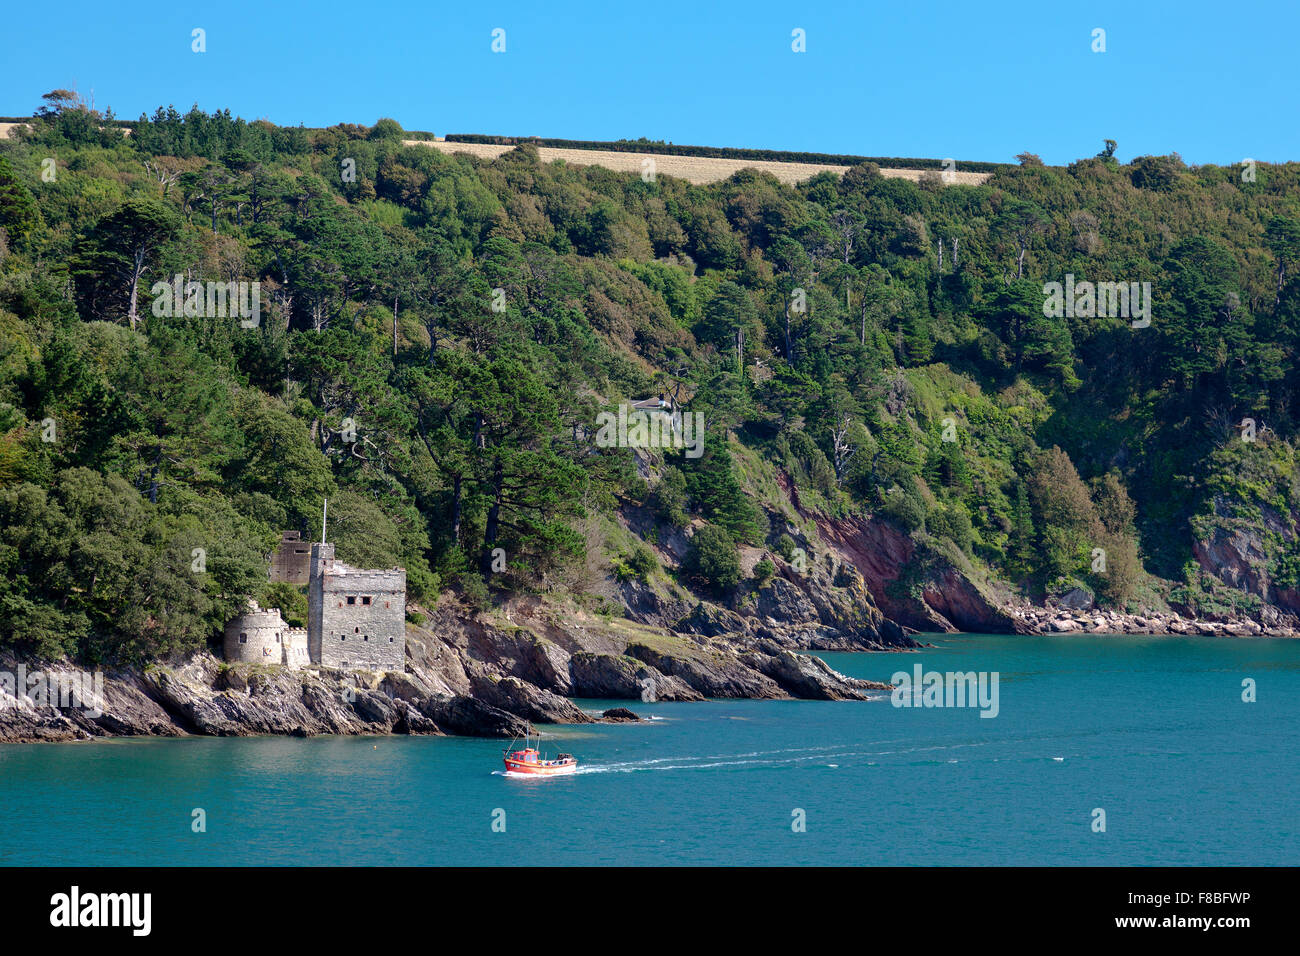 A small fishing boat passes Kingswear Castle at the mouth of the River Dart, Devon, England, UK Stock Photo